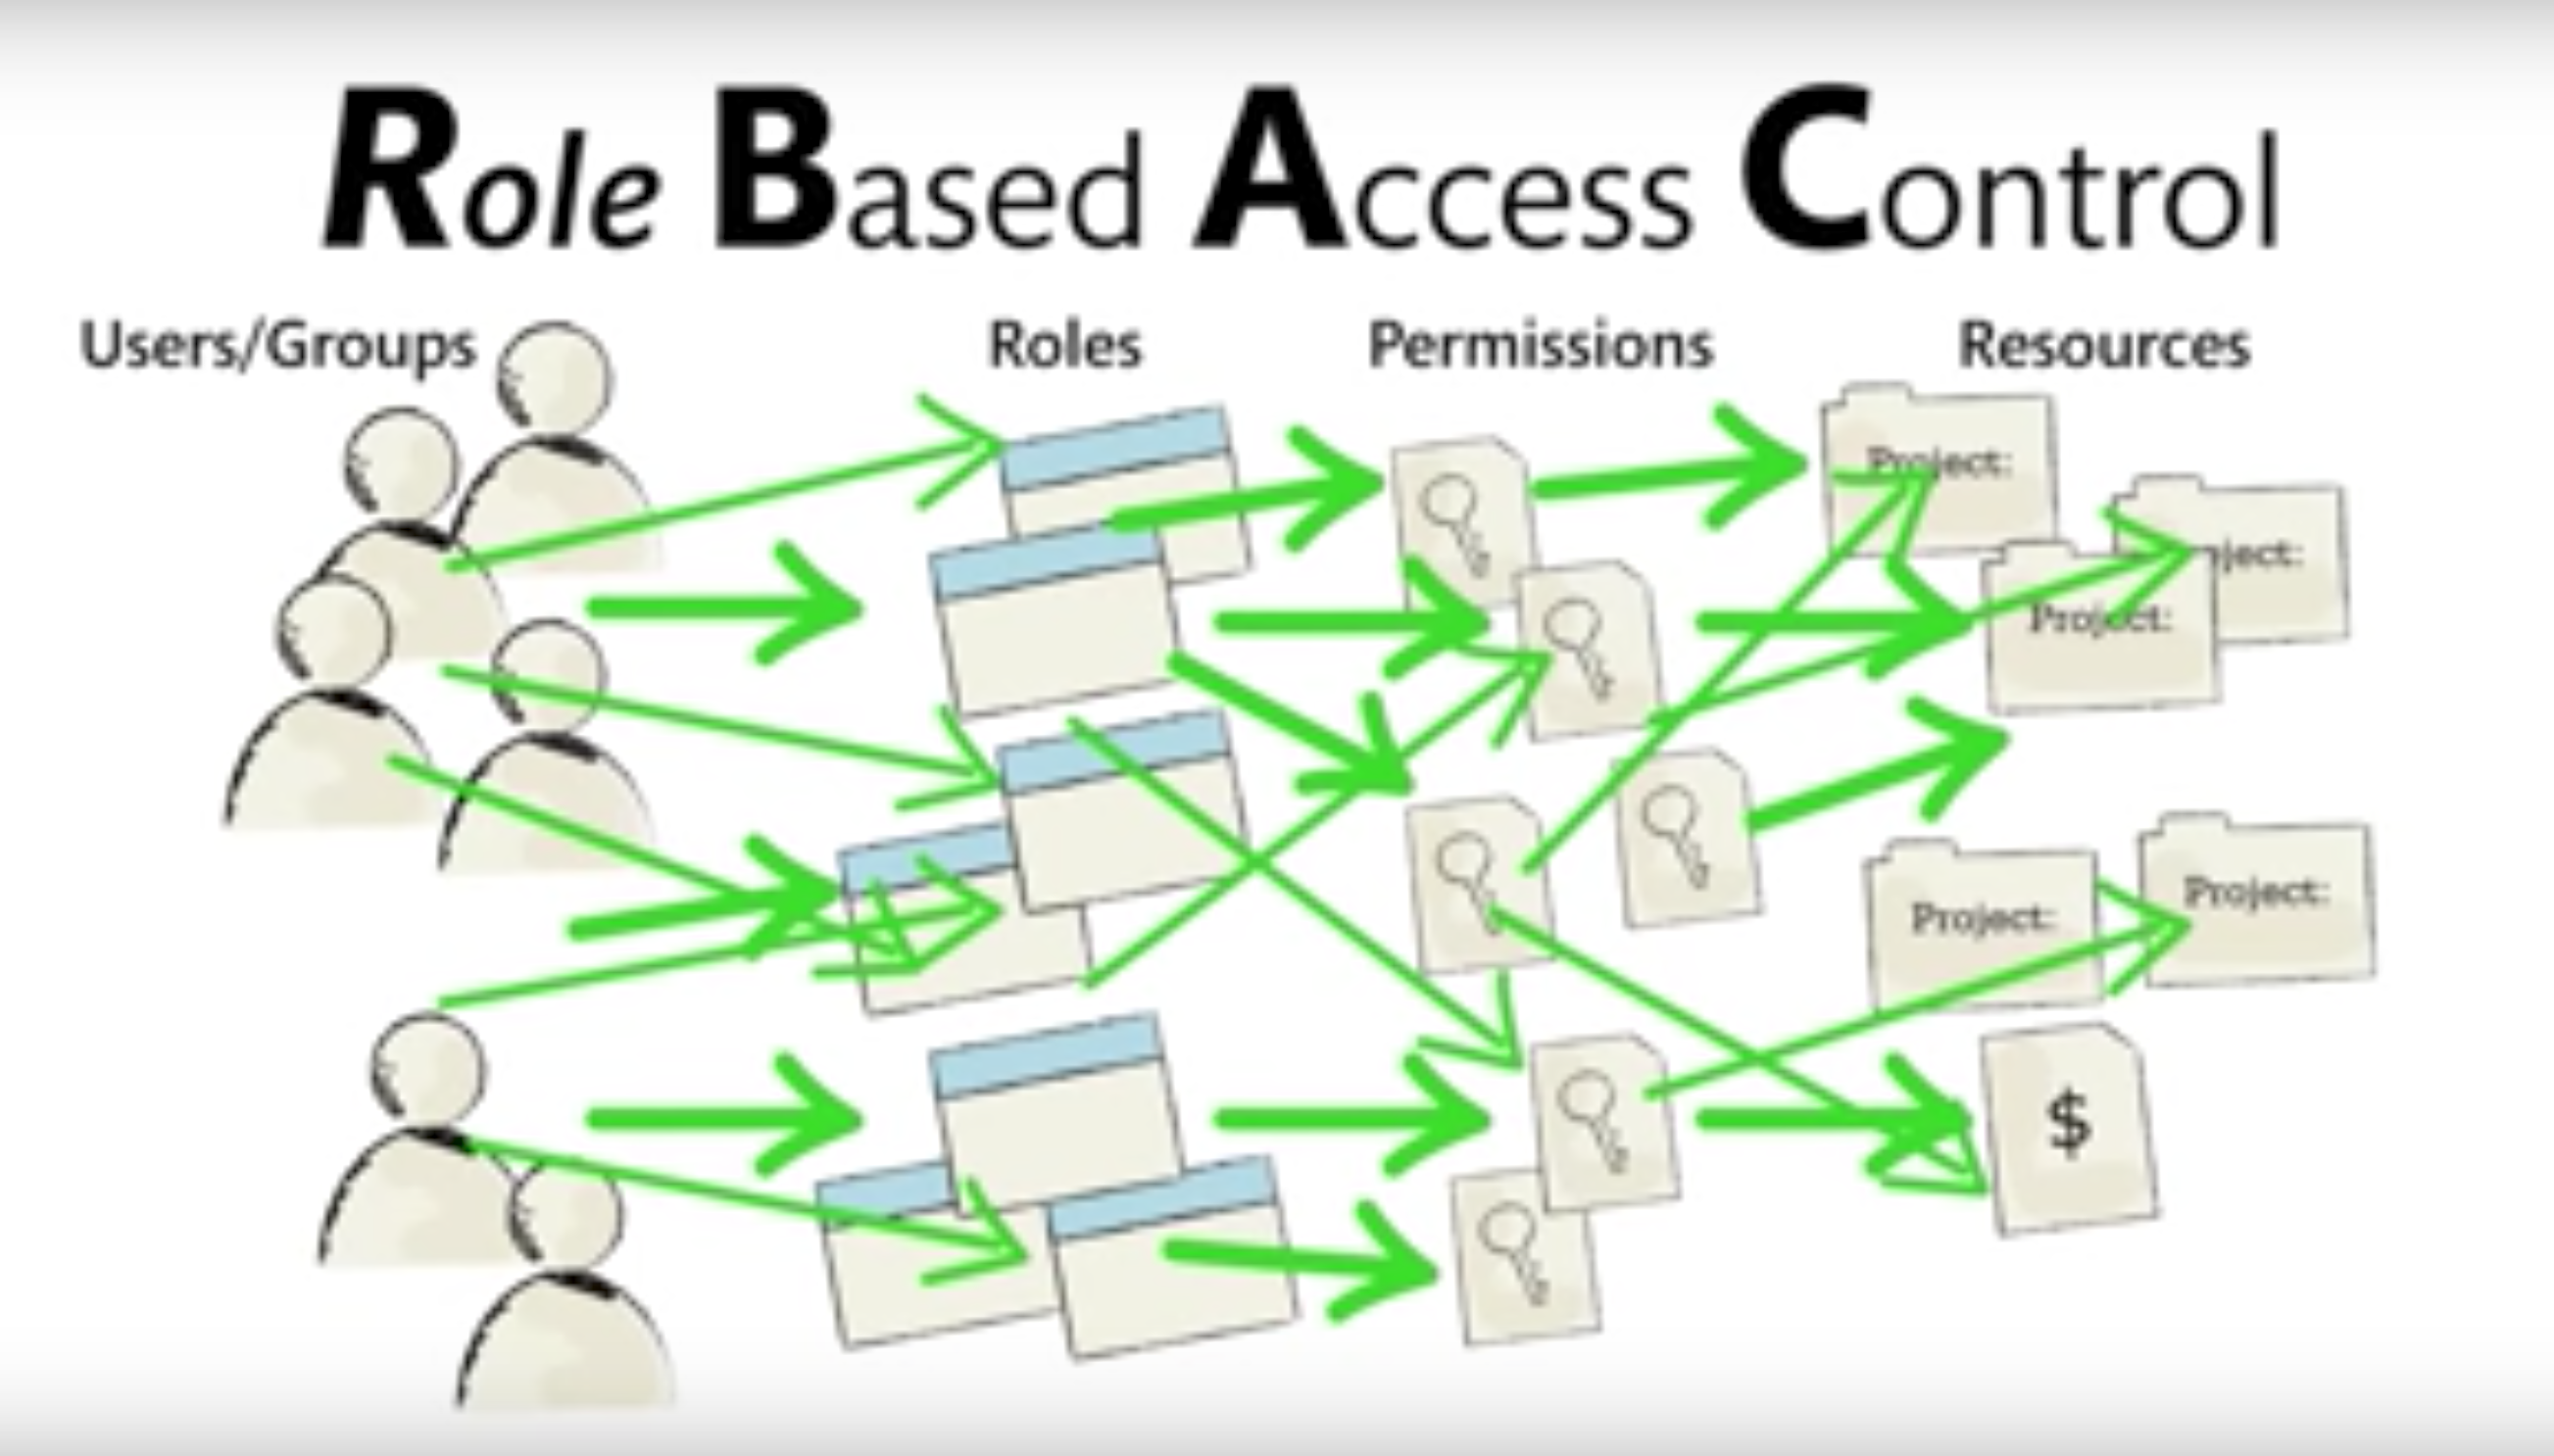 Role Based Access Control, from NIST